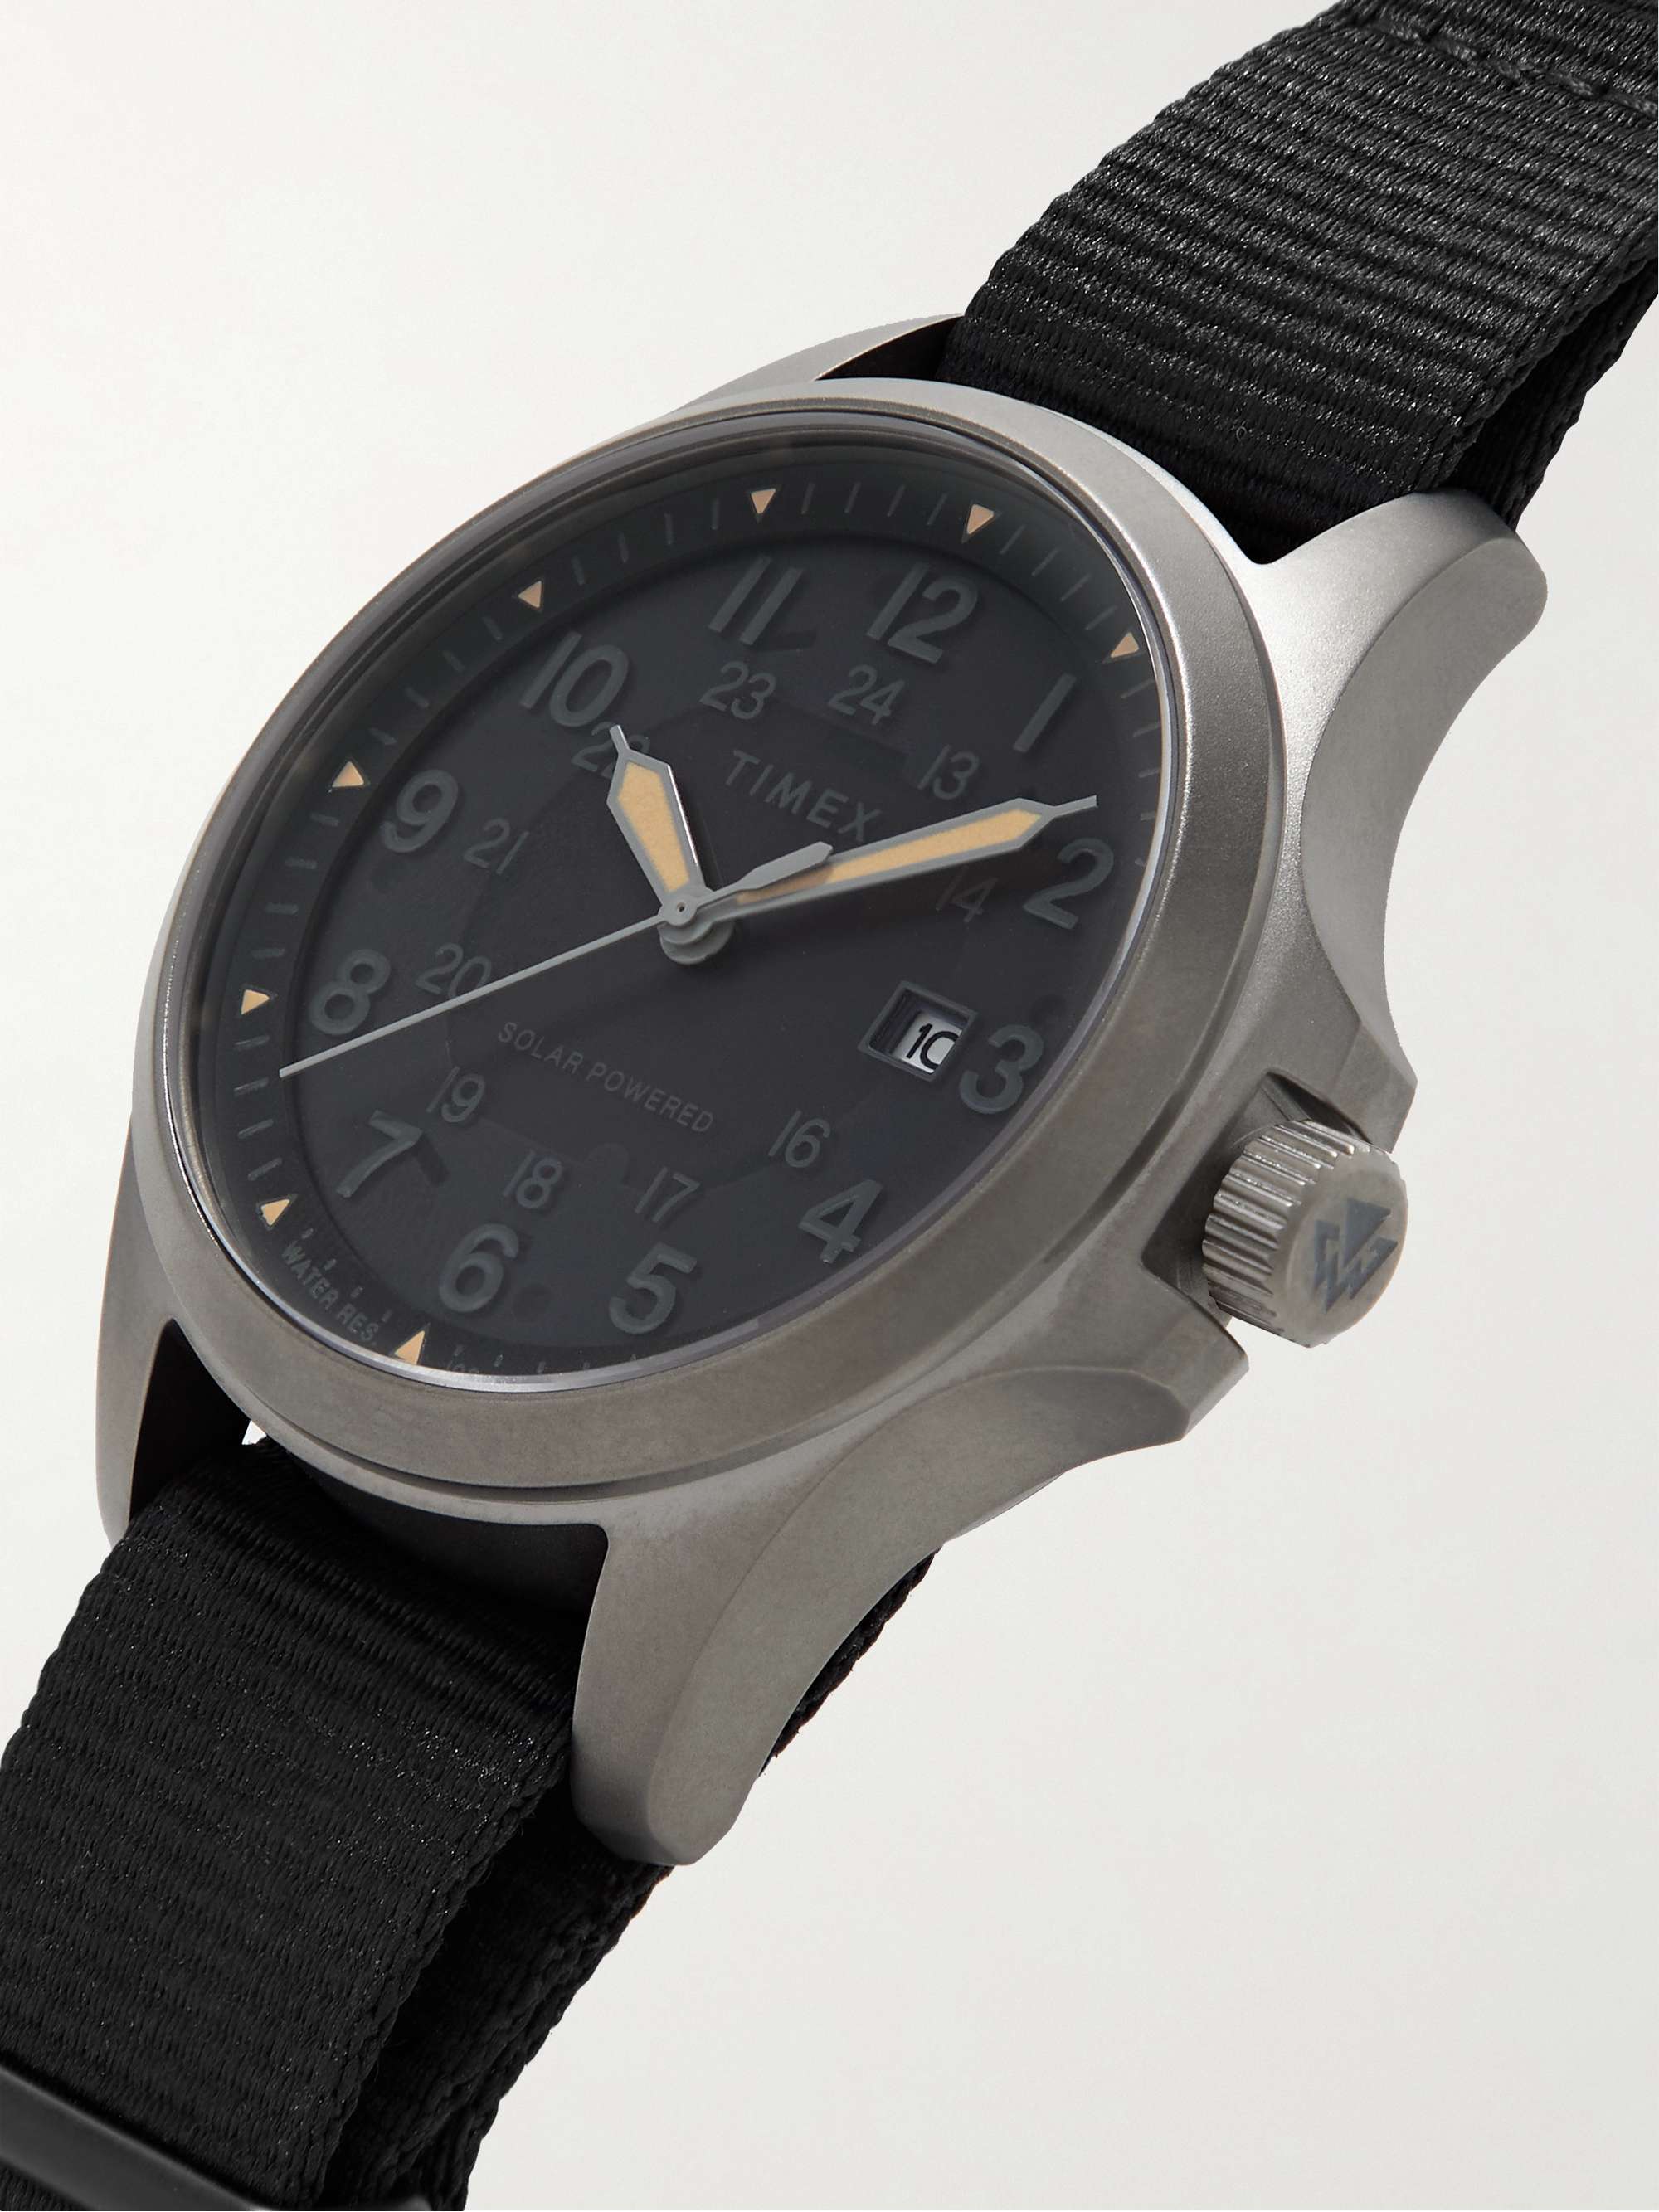 TIMEX Field Post Solar 41mm Stainless Steel and Recycled Webbing Watch